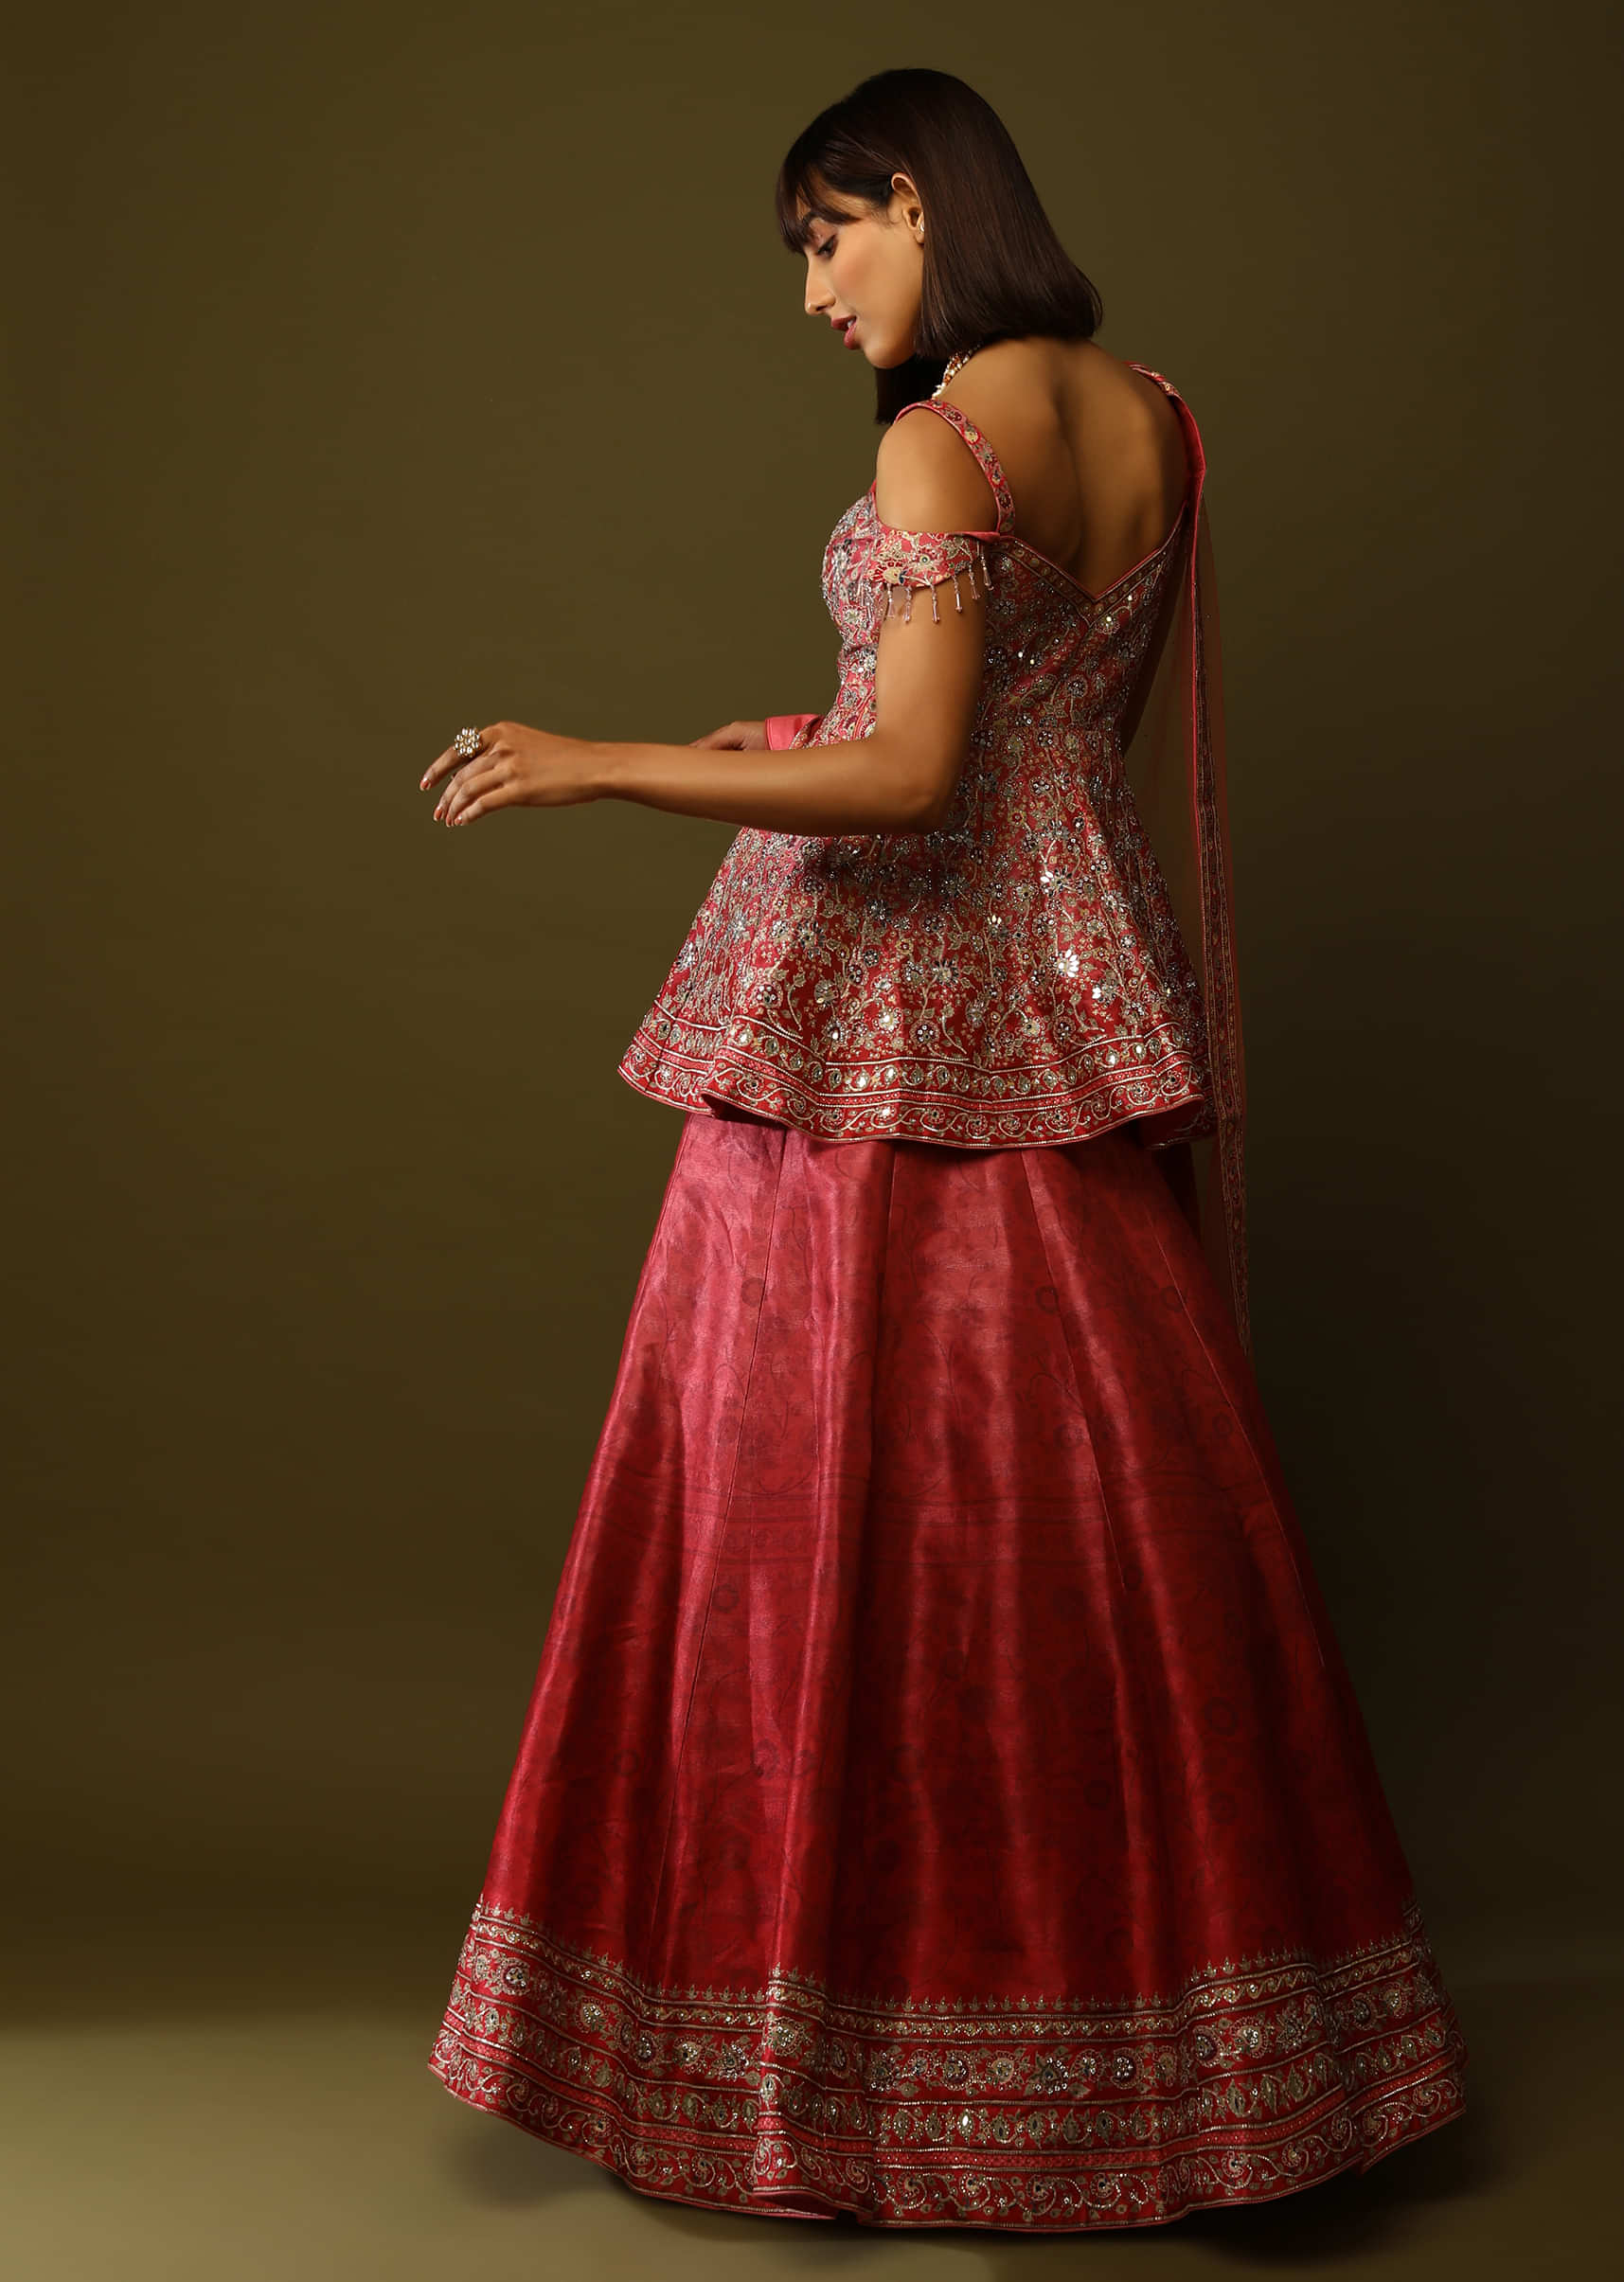 Coral Peach And Red Shaded Lehenga And Peplum Top With Floral Print, Mirror Work And Cold Shoulder Sleeves Online - Kalki Fashion